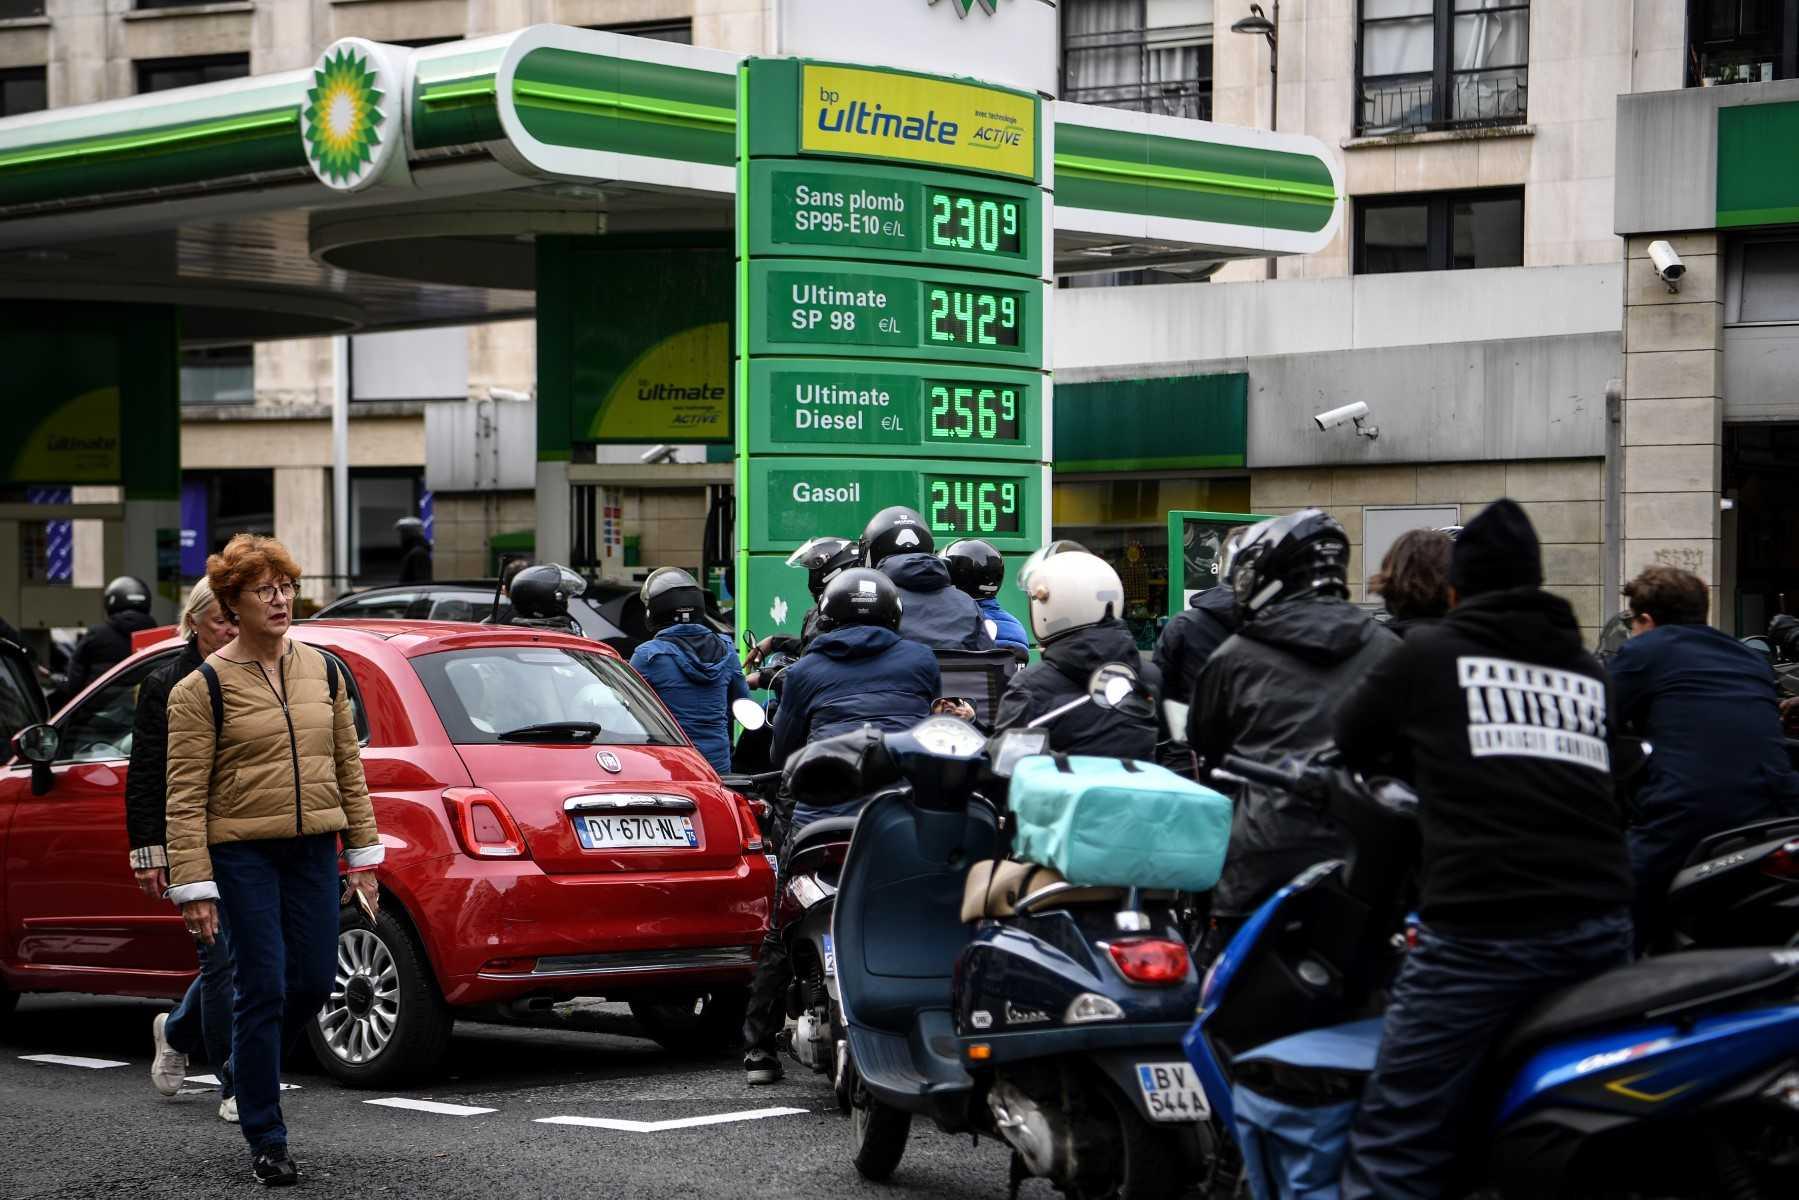 Motorists wait in lines at a gas station in Paris on Oct 15. Photo: AFP